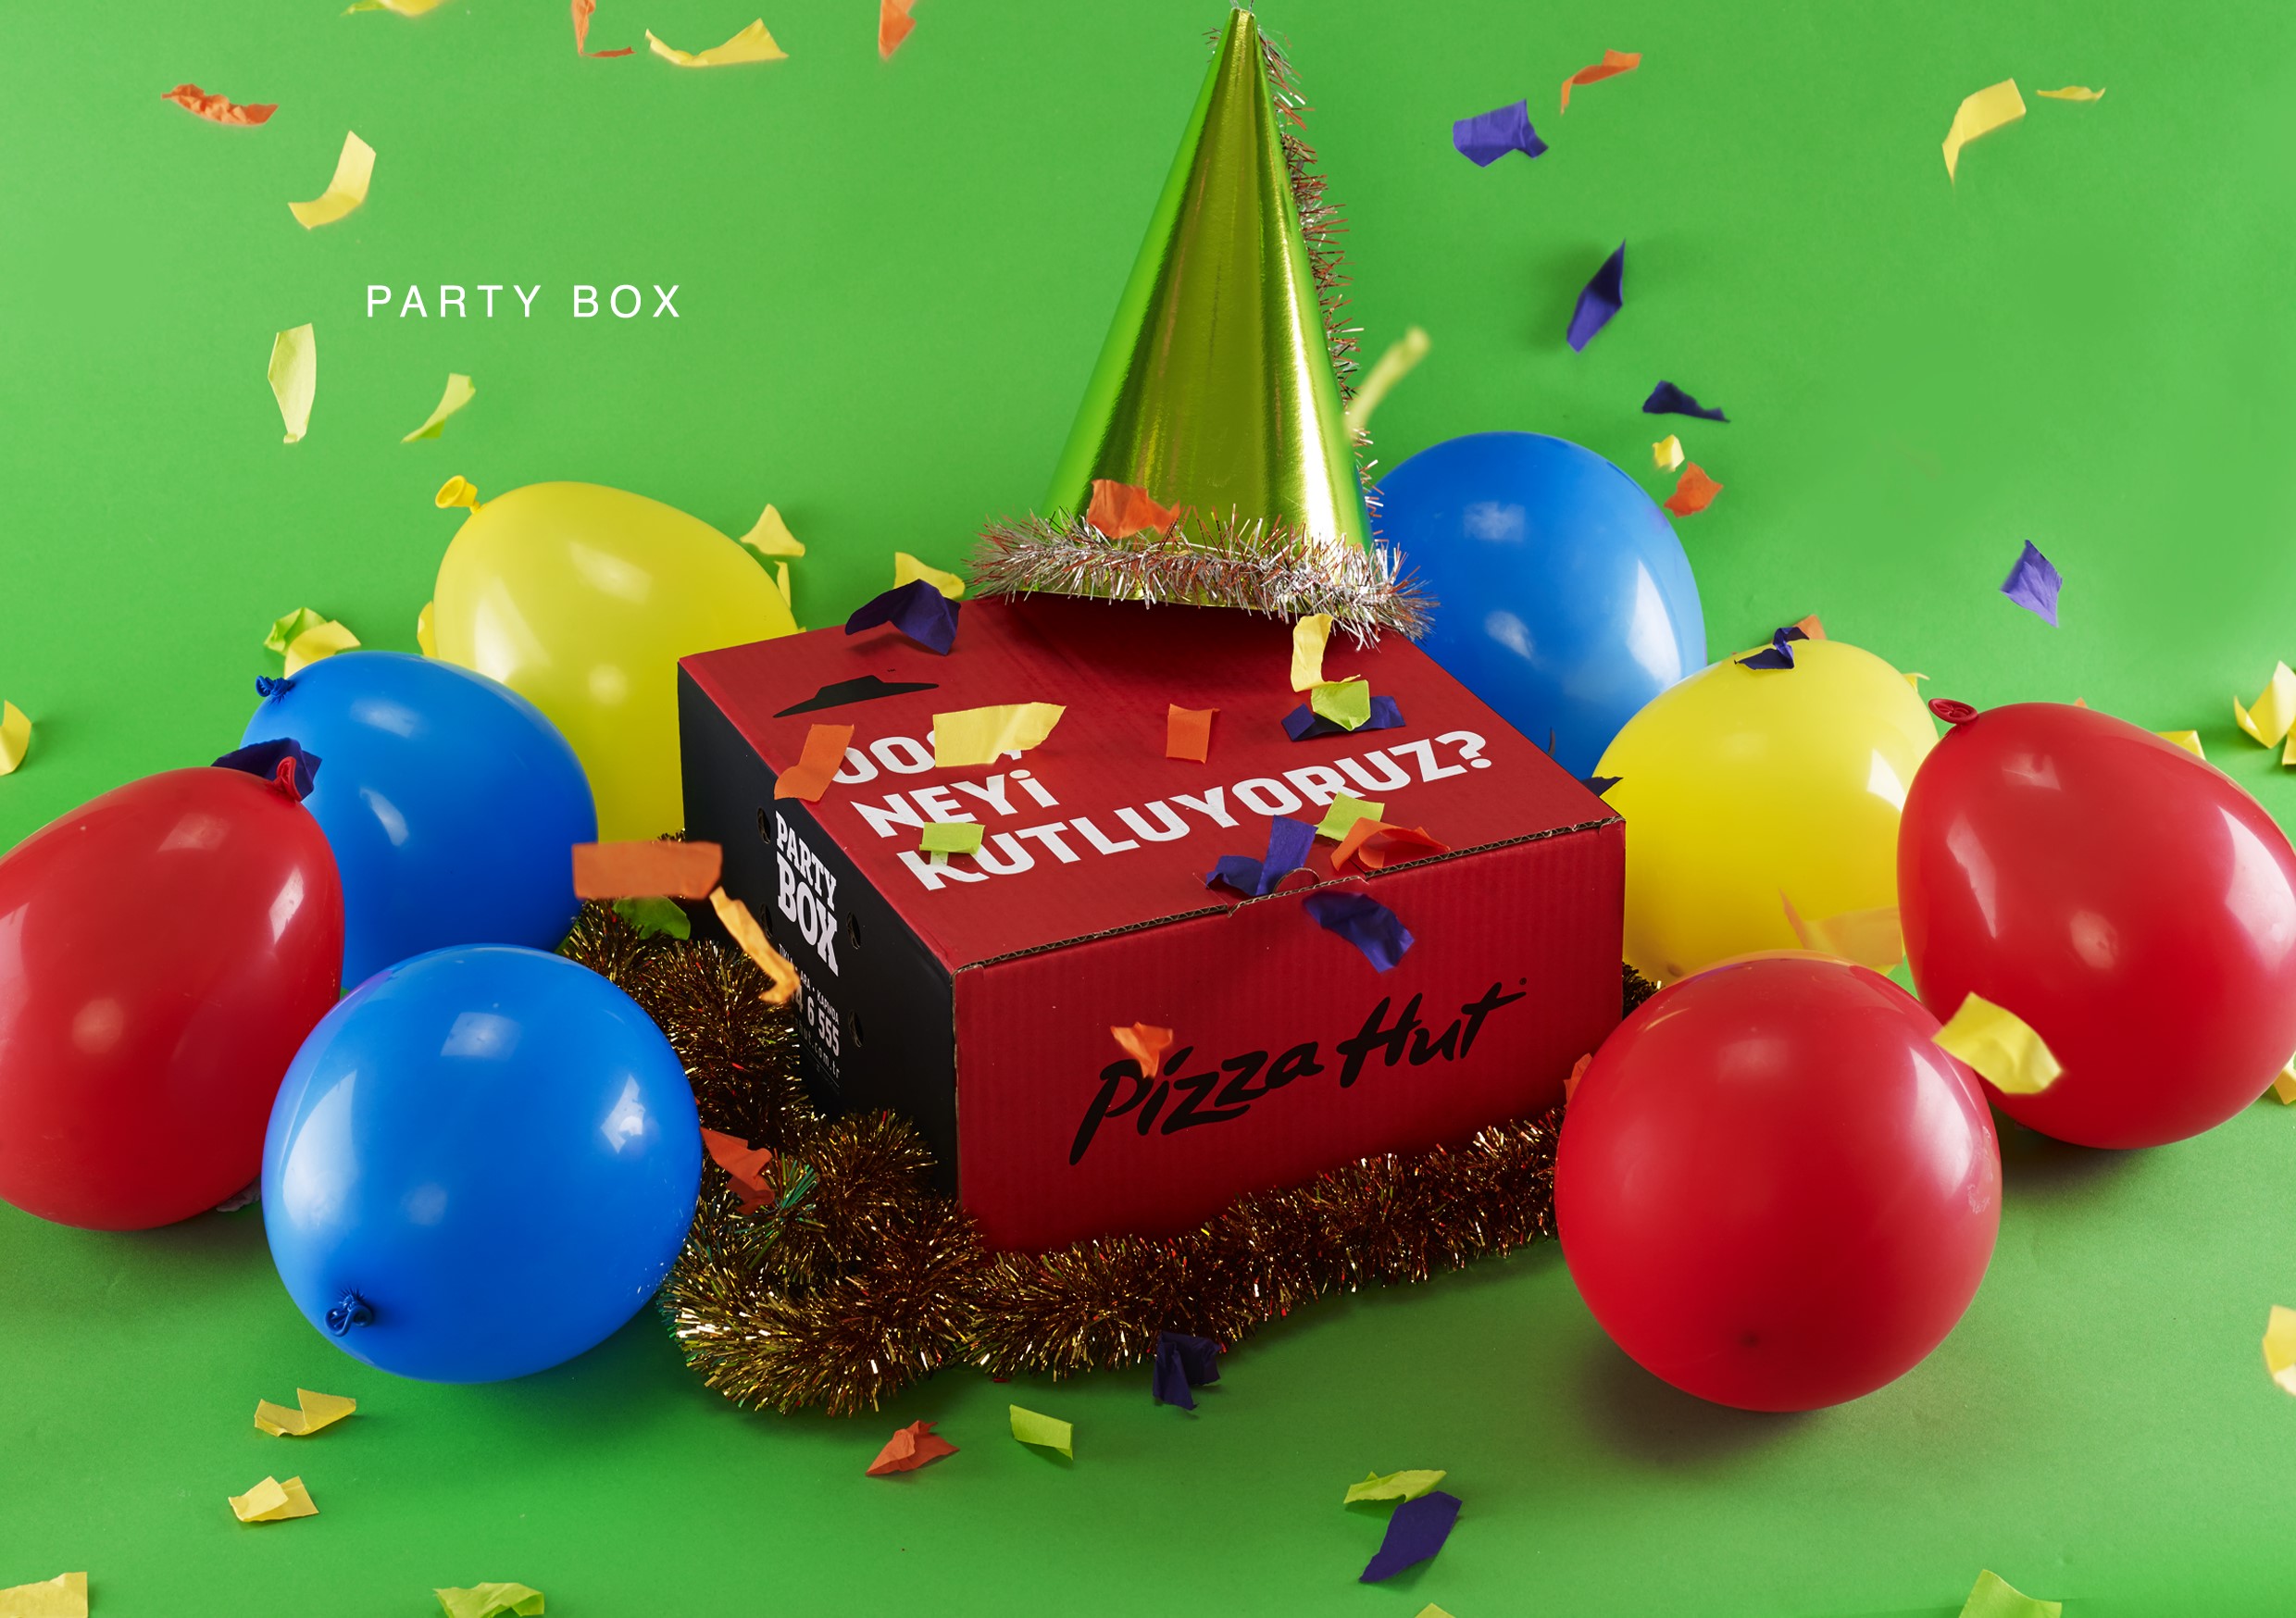 partybox